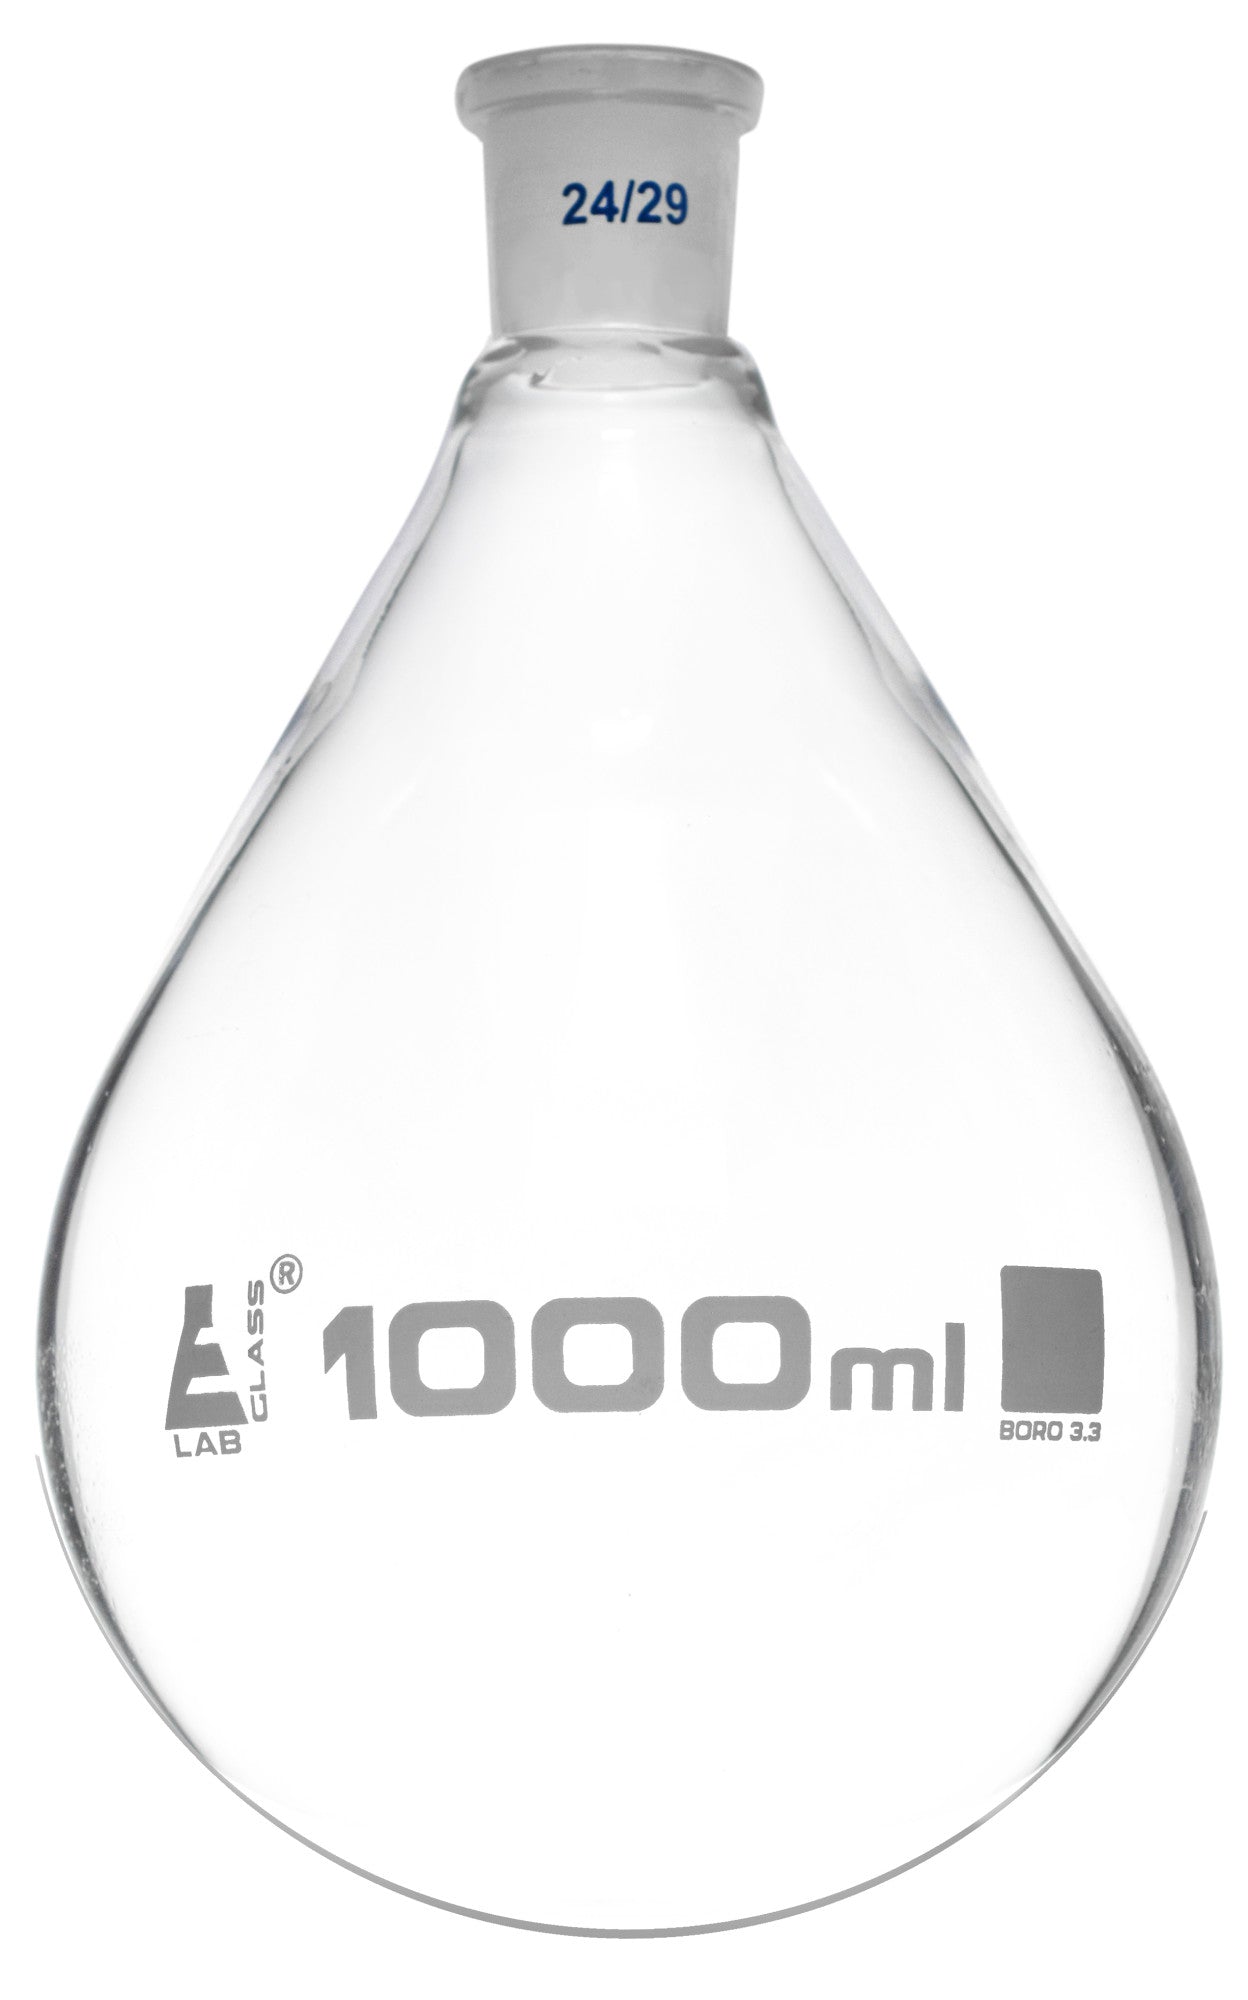 Borosilicate Evaporating Flask with Standard Ground Joint (24/29), 1000 ml, Autoclavable